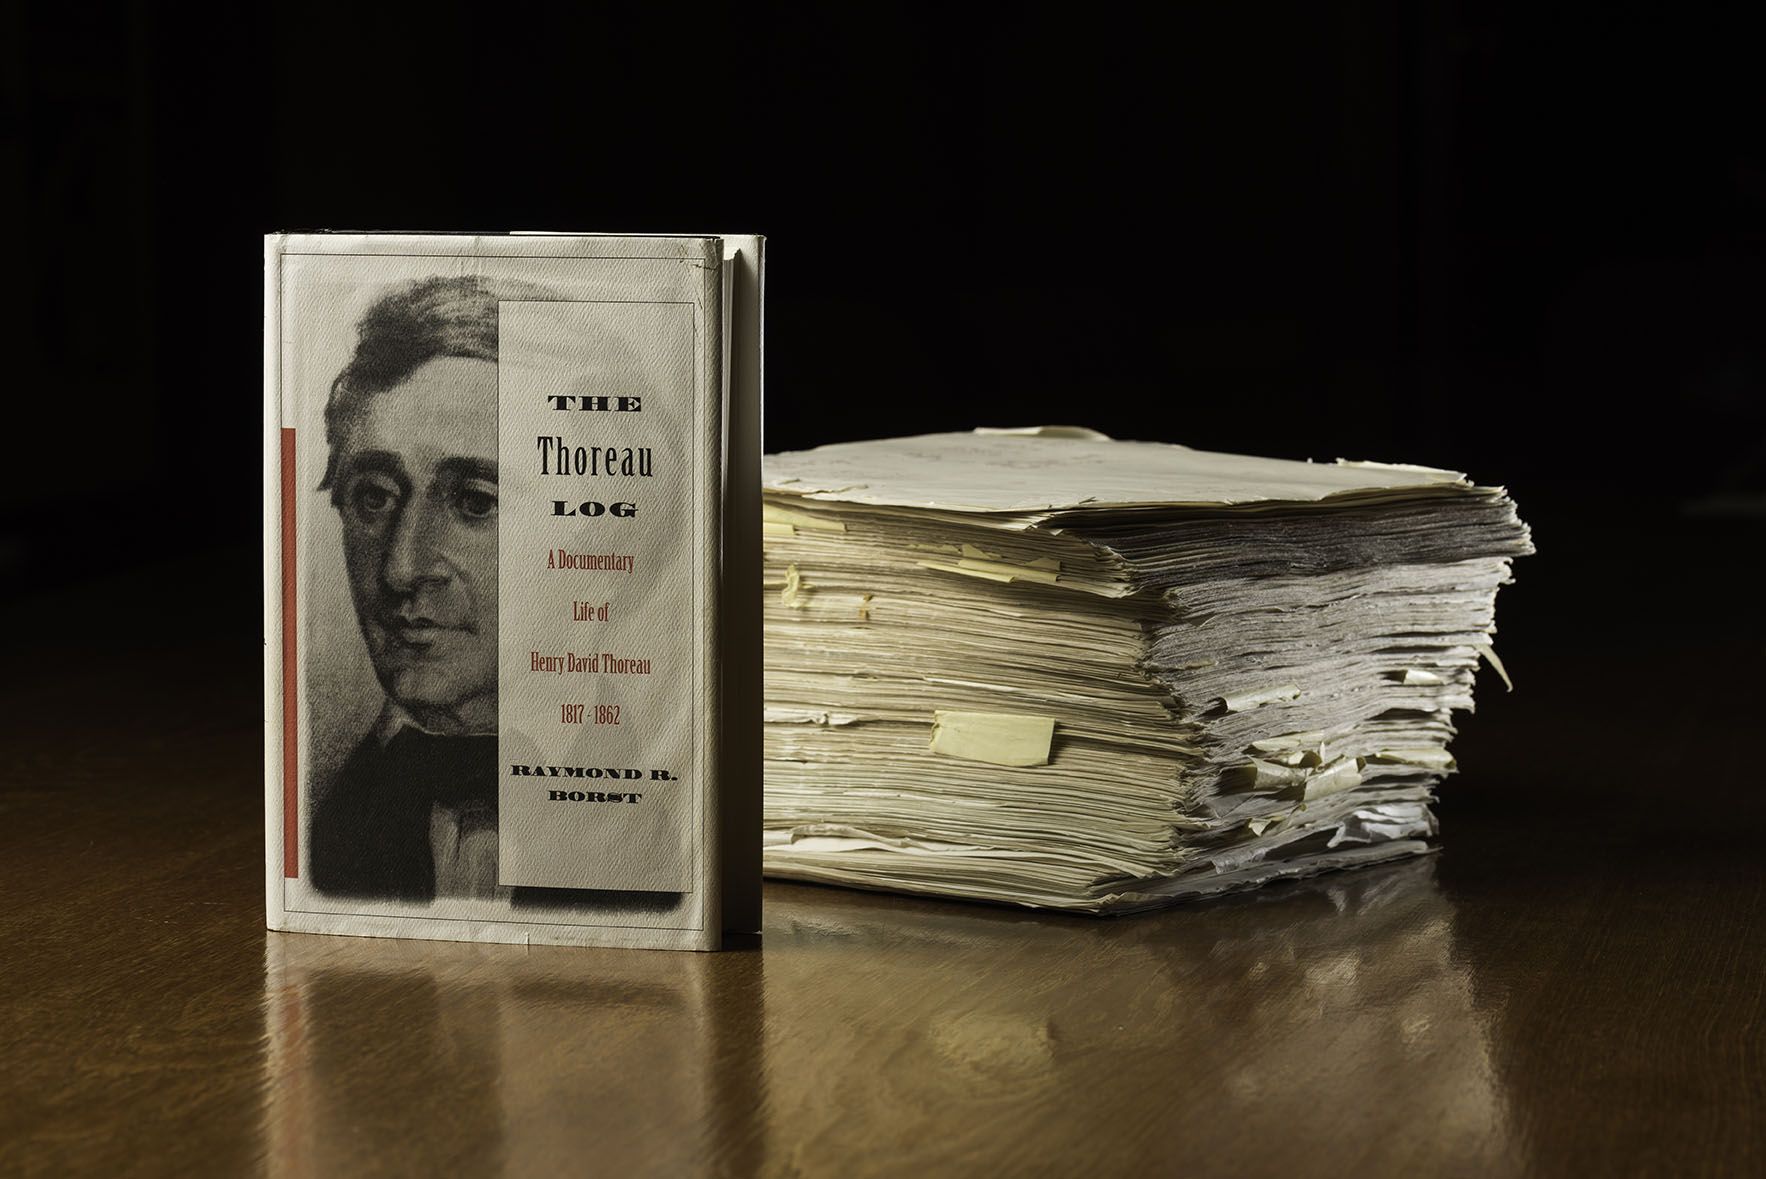 Borst compiled The Thoreau Log: A Documentary Life of Henry David Thoreau, 1817–1862 (G.K. Hall, 1992), an exacting work that pulls together journal entries, correspondence, newspaper articles, and even library records to give account of Thoreau’s life, day by day. Here, the edited typescript appears alongside the first edition of the published work. (Department of Rare Books & Special Collections / Photo by J. Adam Fenster)      